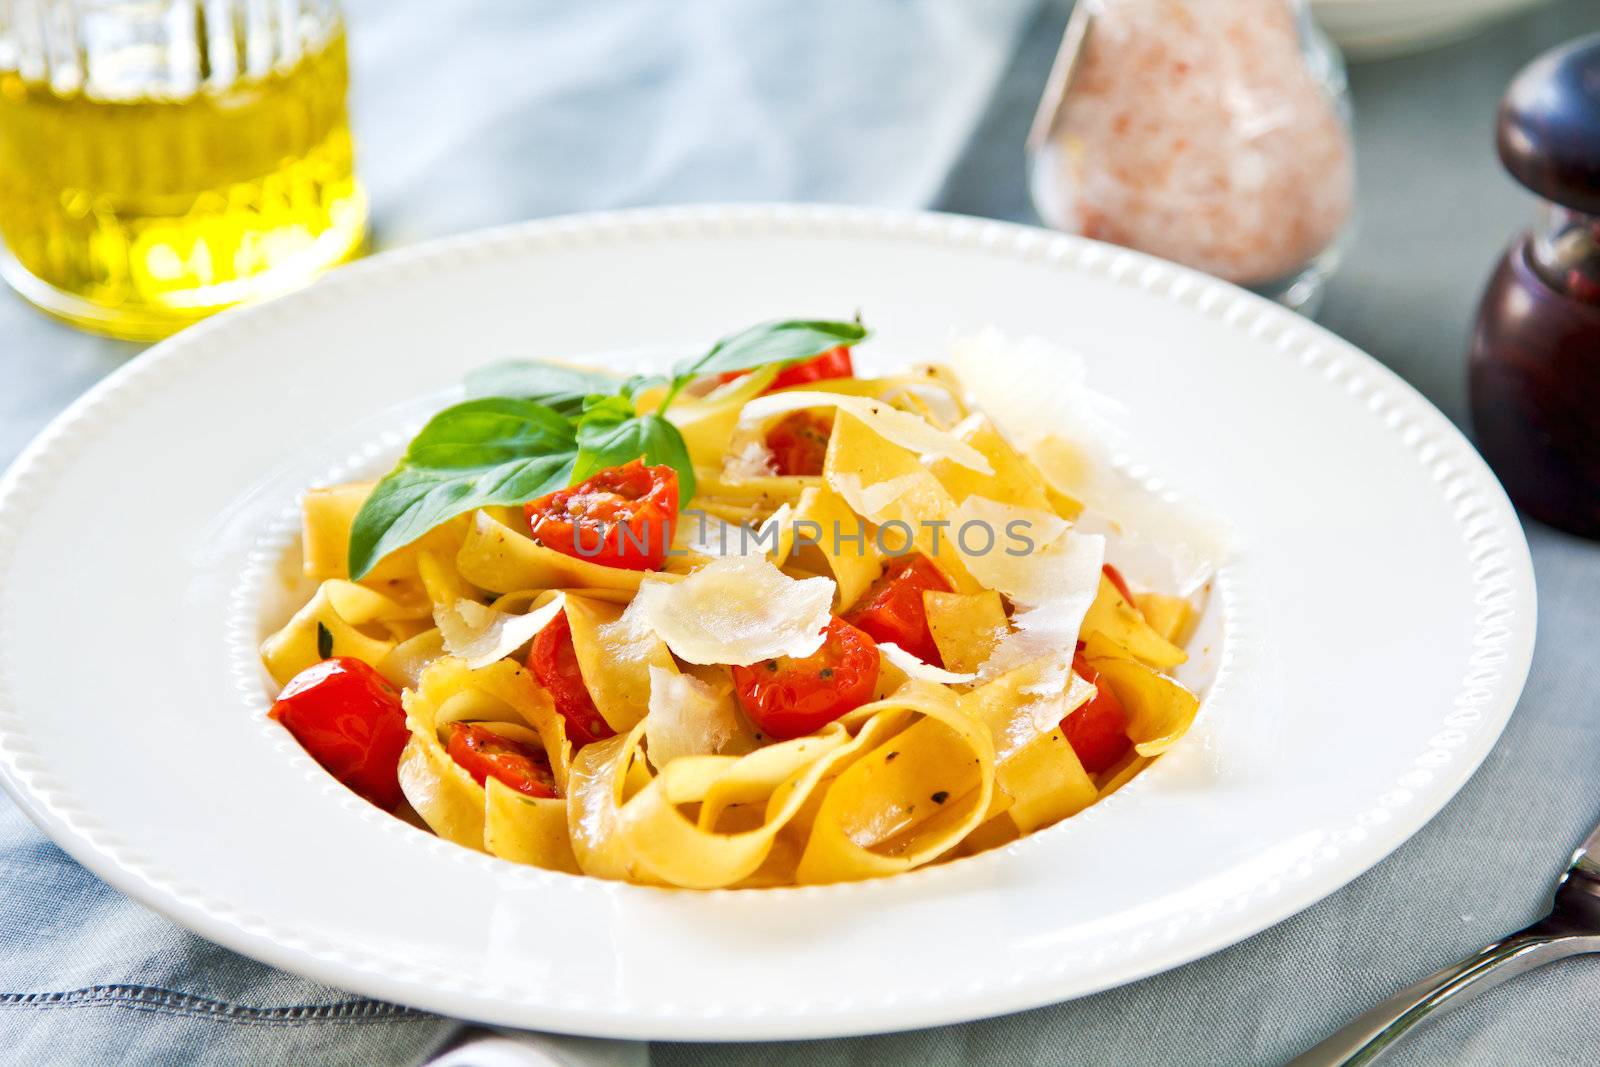 Tagliatelle with cherry tomato and Parmesan on top